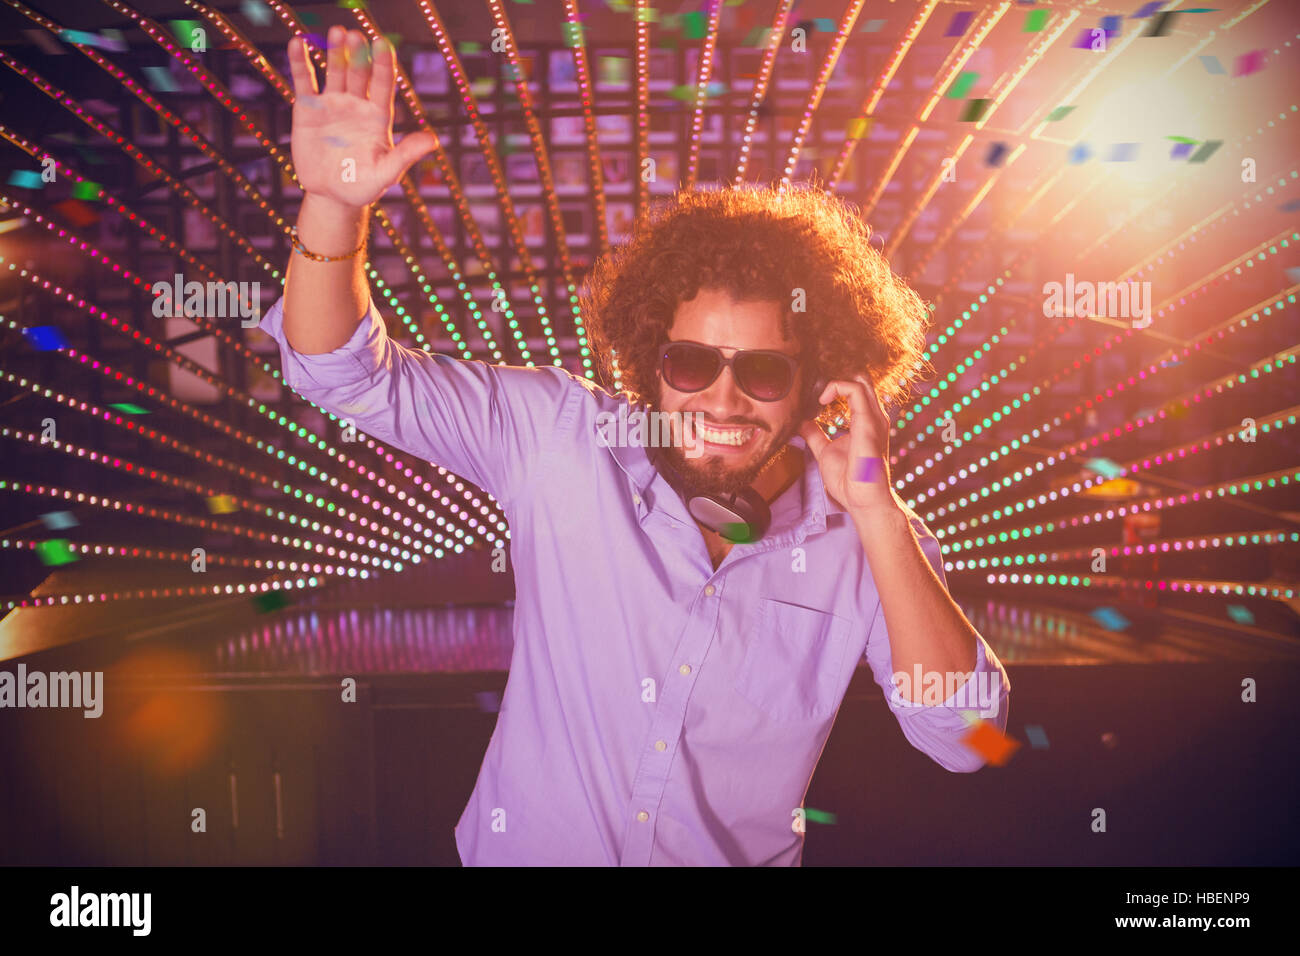 Composite image of male dj playing music Stock Photo